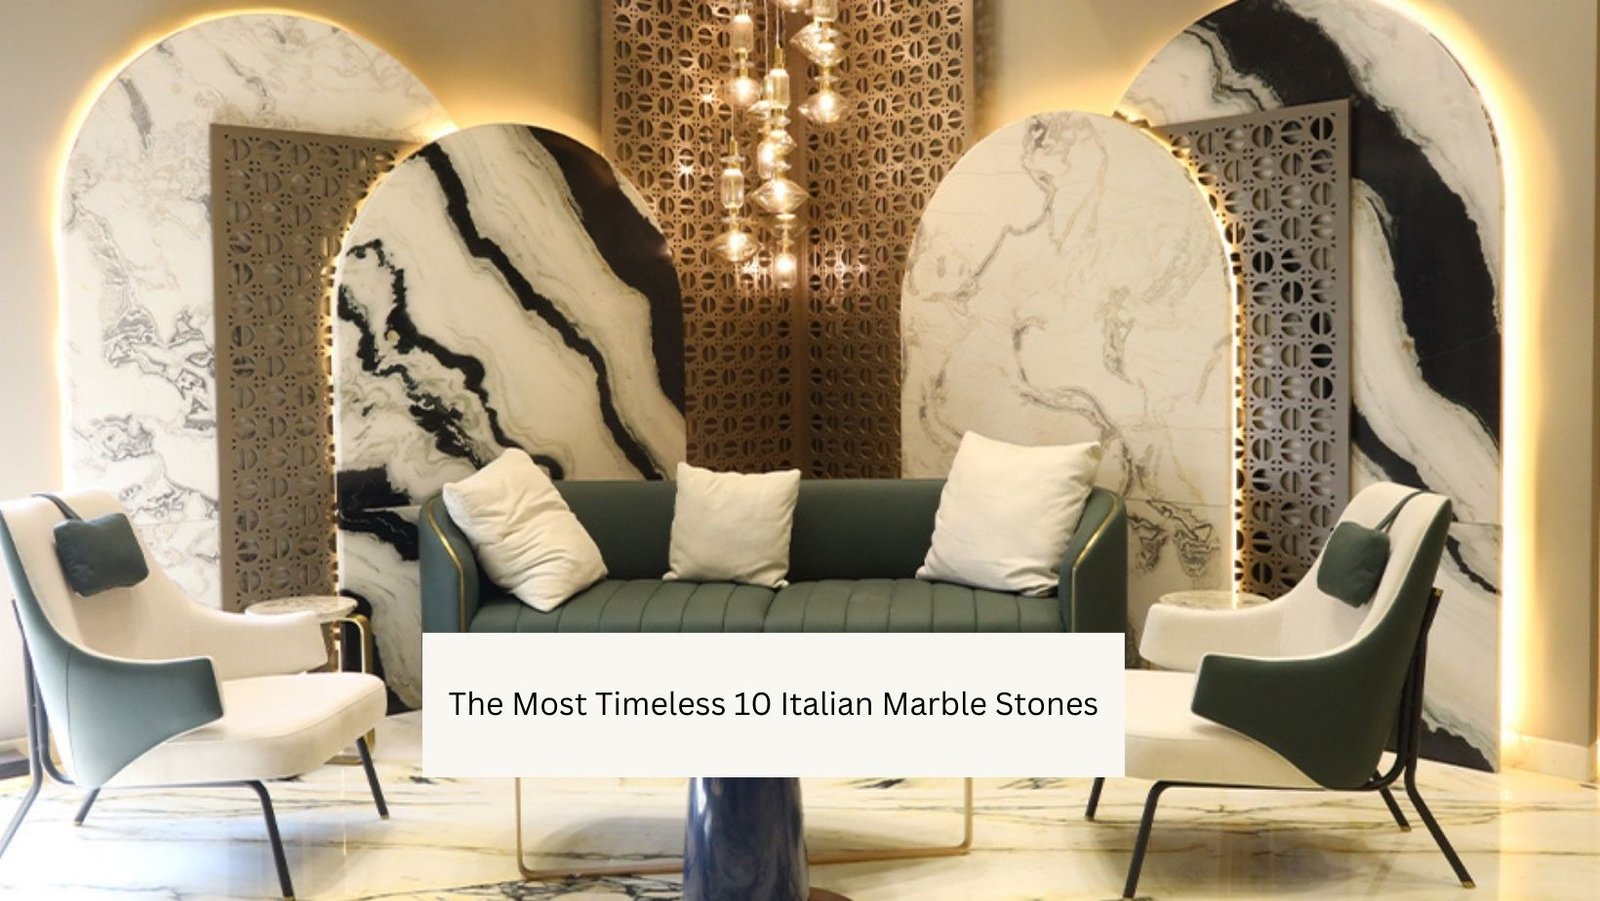 What Are the Most Timeless 10 Italian Marble Stones?